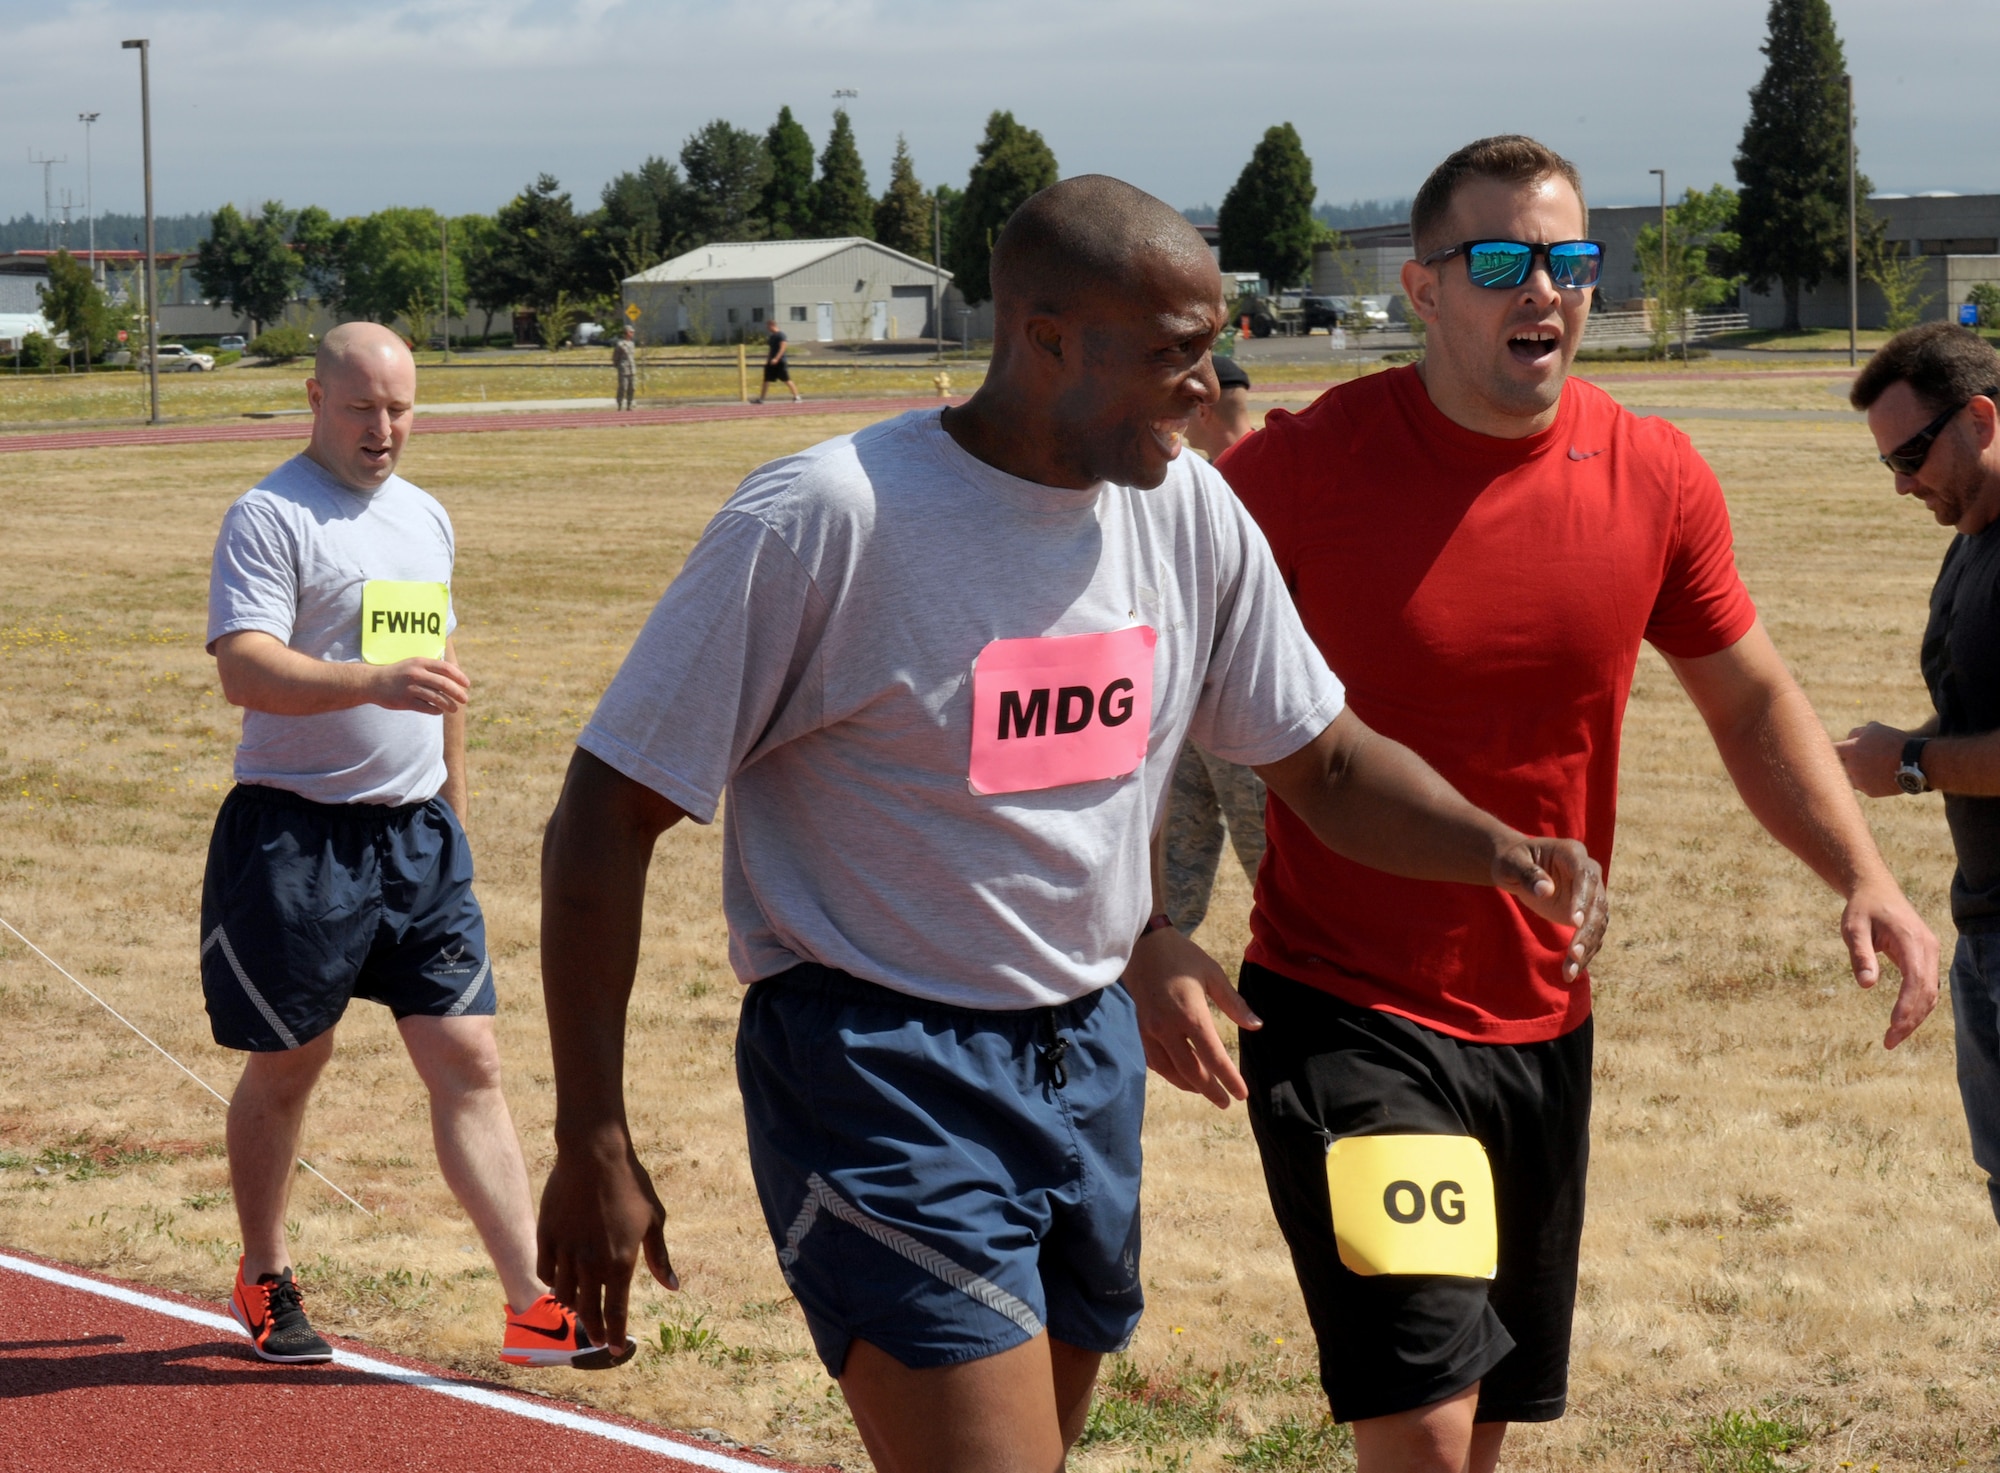 Oregon Air National Guard Tech. Sgt. Justin Comfort, right, and Staff Sgt. Breland Reed,  center, along with Staff Sgt. Andrew Hensley, left, attempt to catch their breath after their quarter mile race held at the new track at the Portland Air National Guard Base, Ore., July 26, 2016. (U.S. Air National Guard photo by Tech. Sgt. John Hughel, 142nd Fighter Wing Public Affairs/Released)